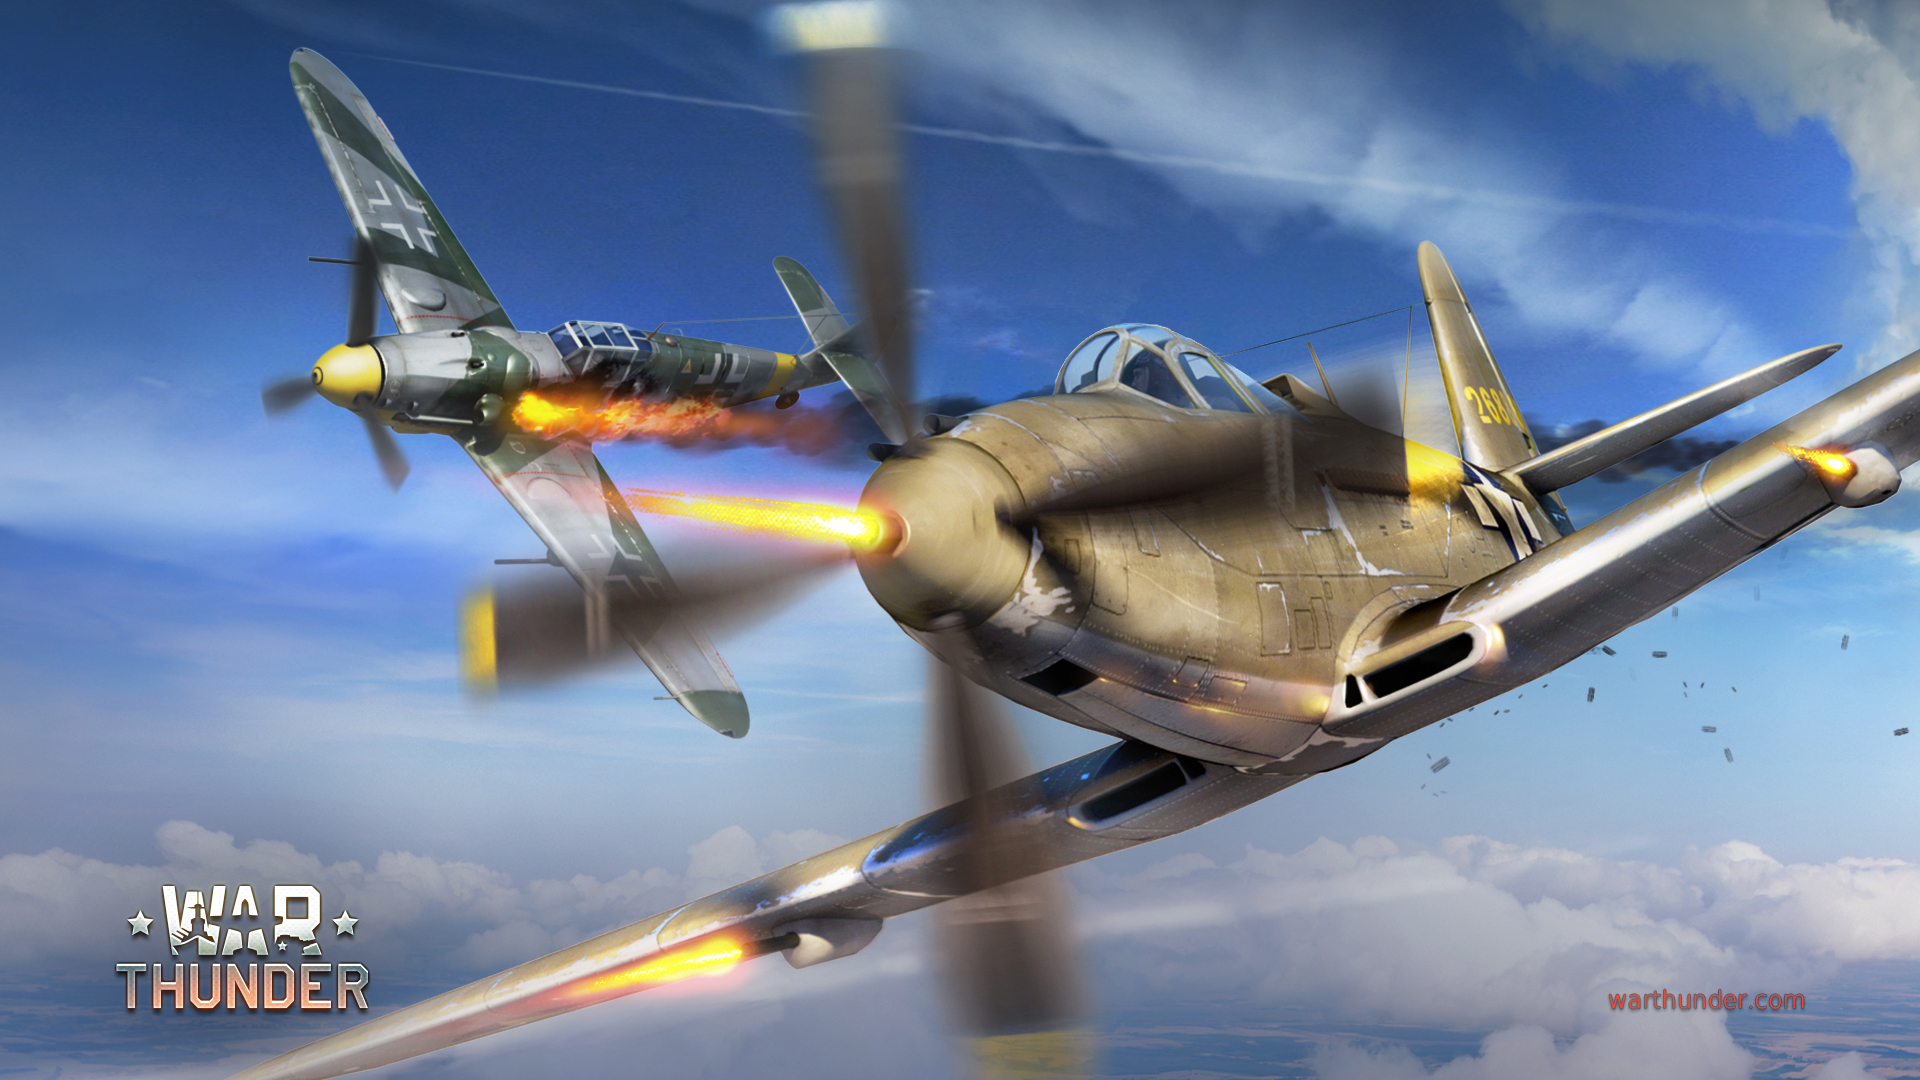 Vastly Improving Reworking Air Rb New Game Modes Reconnaissance Interception Night Fighting Etc Passed For Consideration War Thunder Official Forum